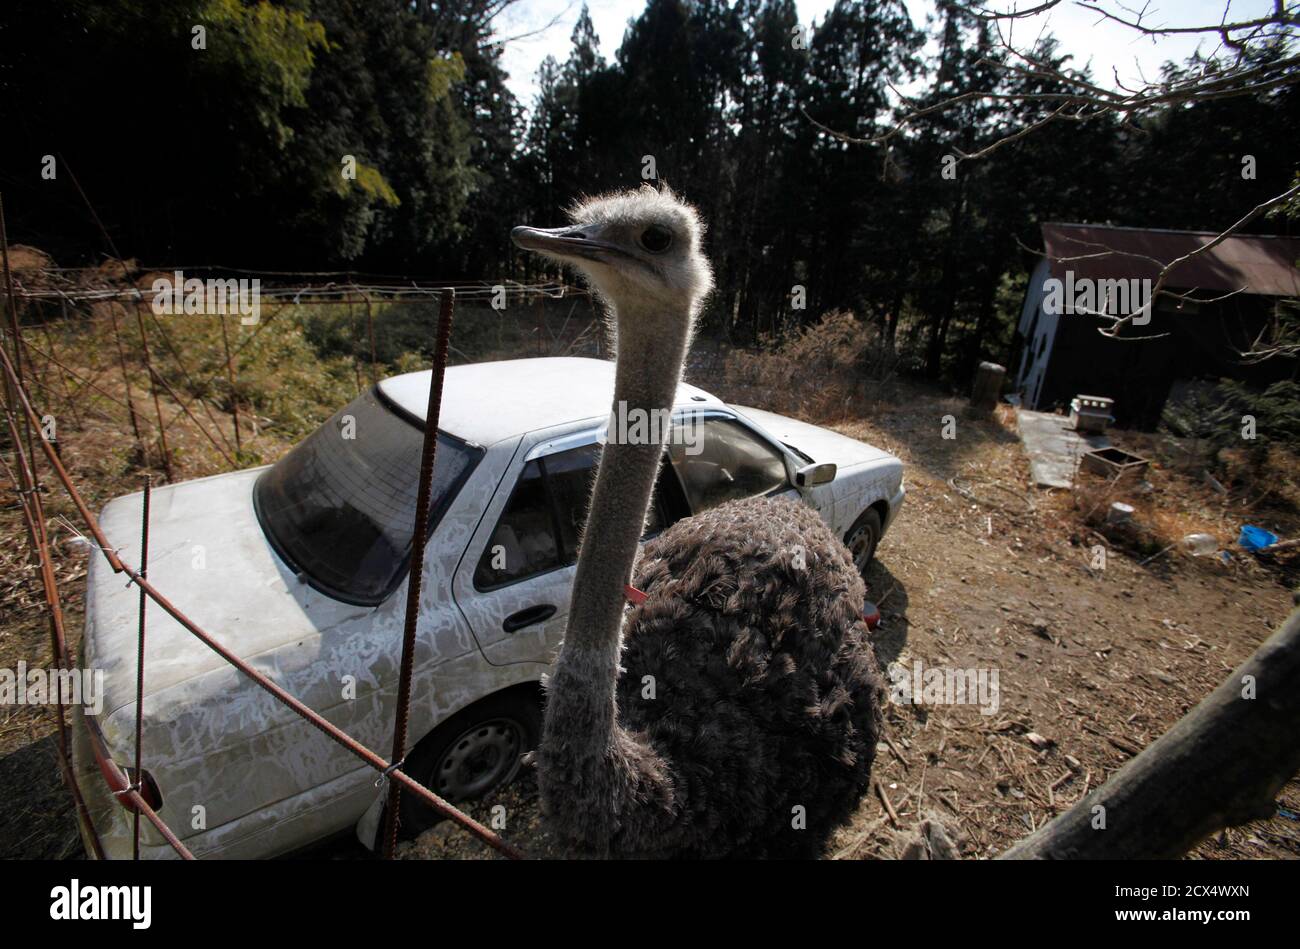 ATTENTION EDITORS - THIS IMAGE IS 21 OF 22 TO ACCOMPANY A PICTURE PACKAGE ON THE EVACUATED TOWNS INSIDE THE 20KM EXCLUSION ZONE AROUND THE FUKUSHIMA DAIICHI NUCLEAR POWER PLANT. SEARCH KEYWORD 'FUKUSHIMA' TO SEE ALL IMAGES PXP900-921.  An ostrich which had escaped from a farm is seen in Tomioka town, inside the exclusion zone of a 20km radius around the crippled Fukushima Daiichi nuclear power plant, Fukushima prefecture, January 15, 2012. The Fukushima Daiichi nuclear power plant was hit on March 11, 2011 by a tsunami that exceeded 15 metres in some areas. The tsunami knocked out the plant's  Stock Photo